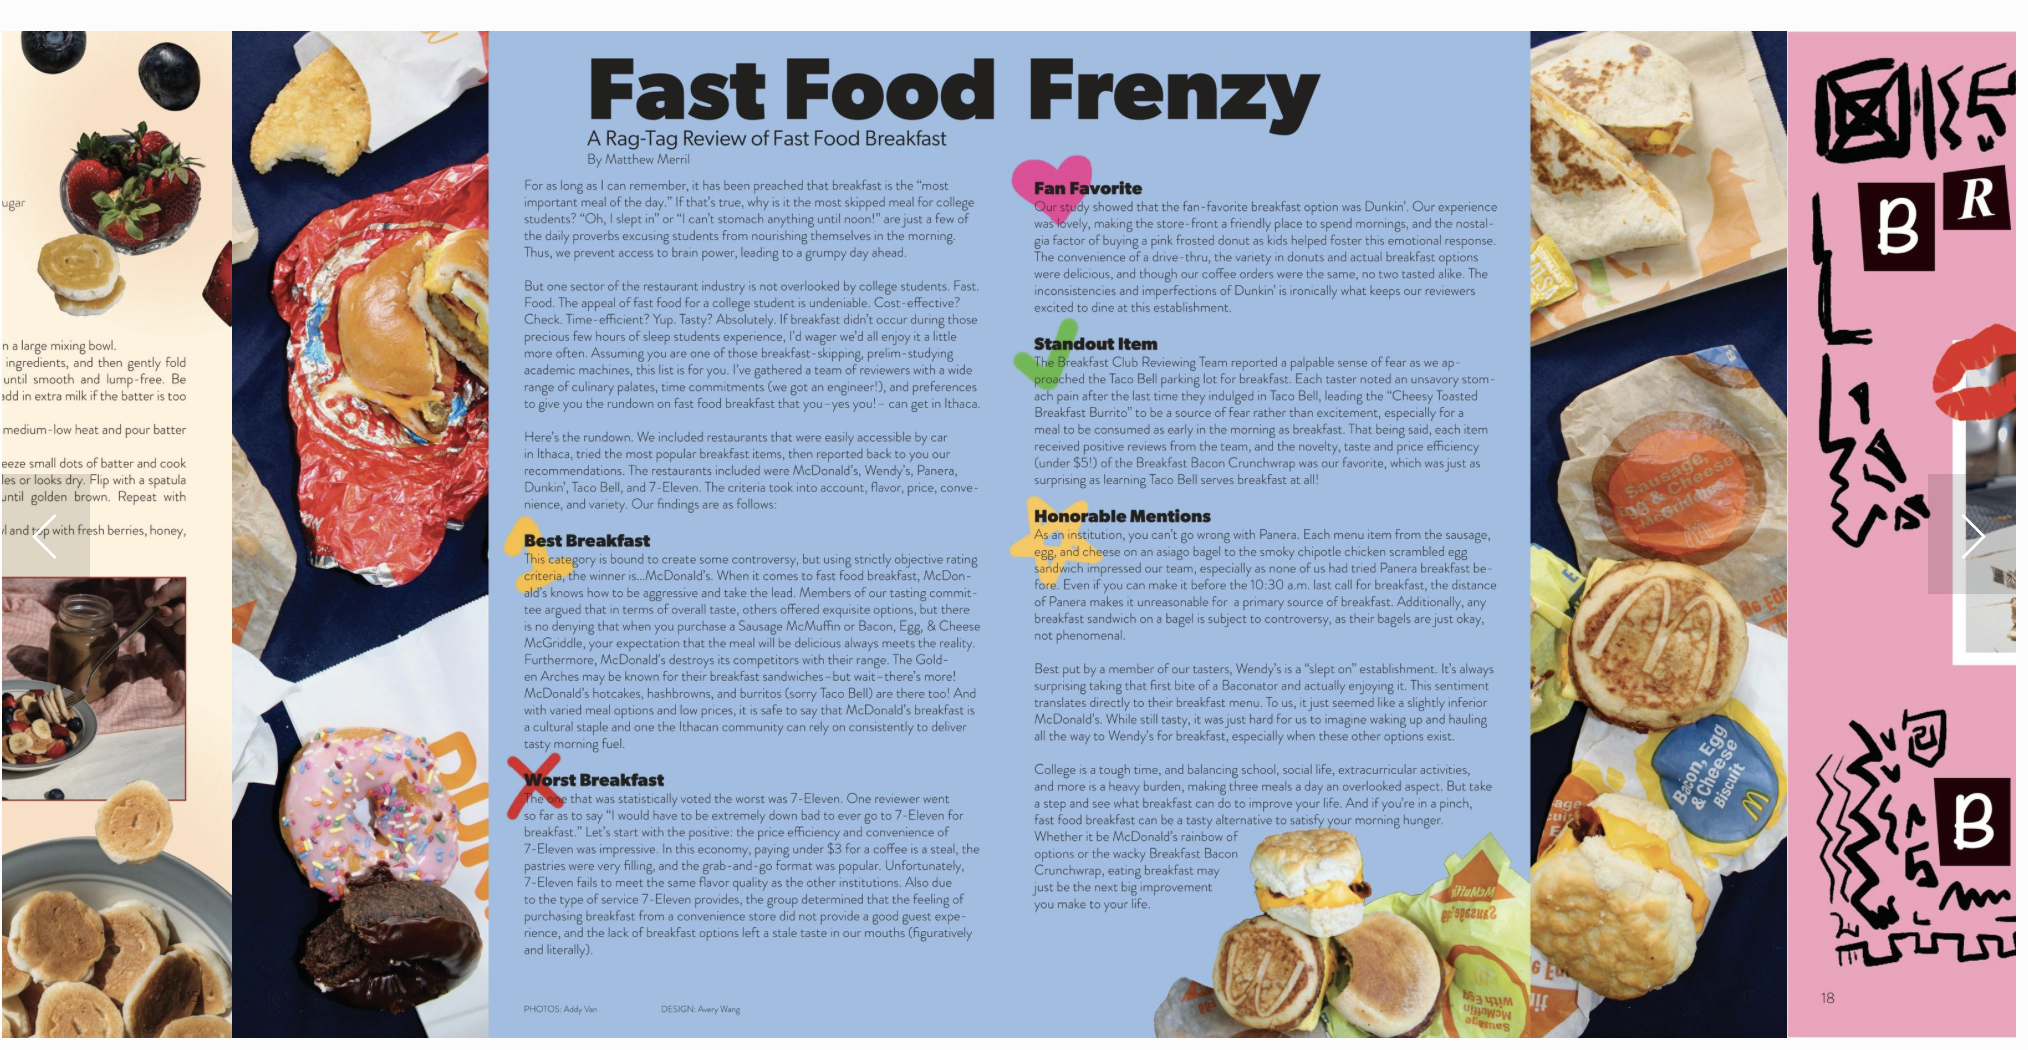 Fast Food Frenzy: Highlights from Matthew Merril’s Latest Article in Creme de Cornell